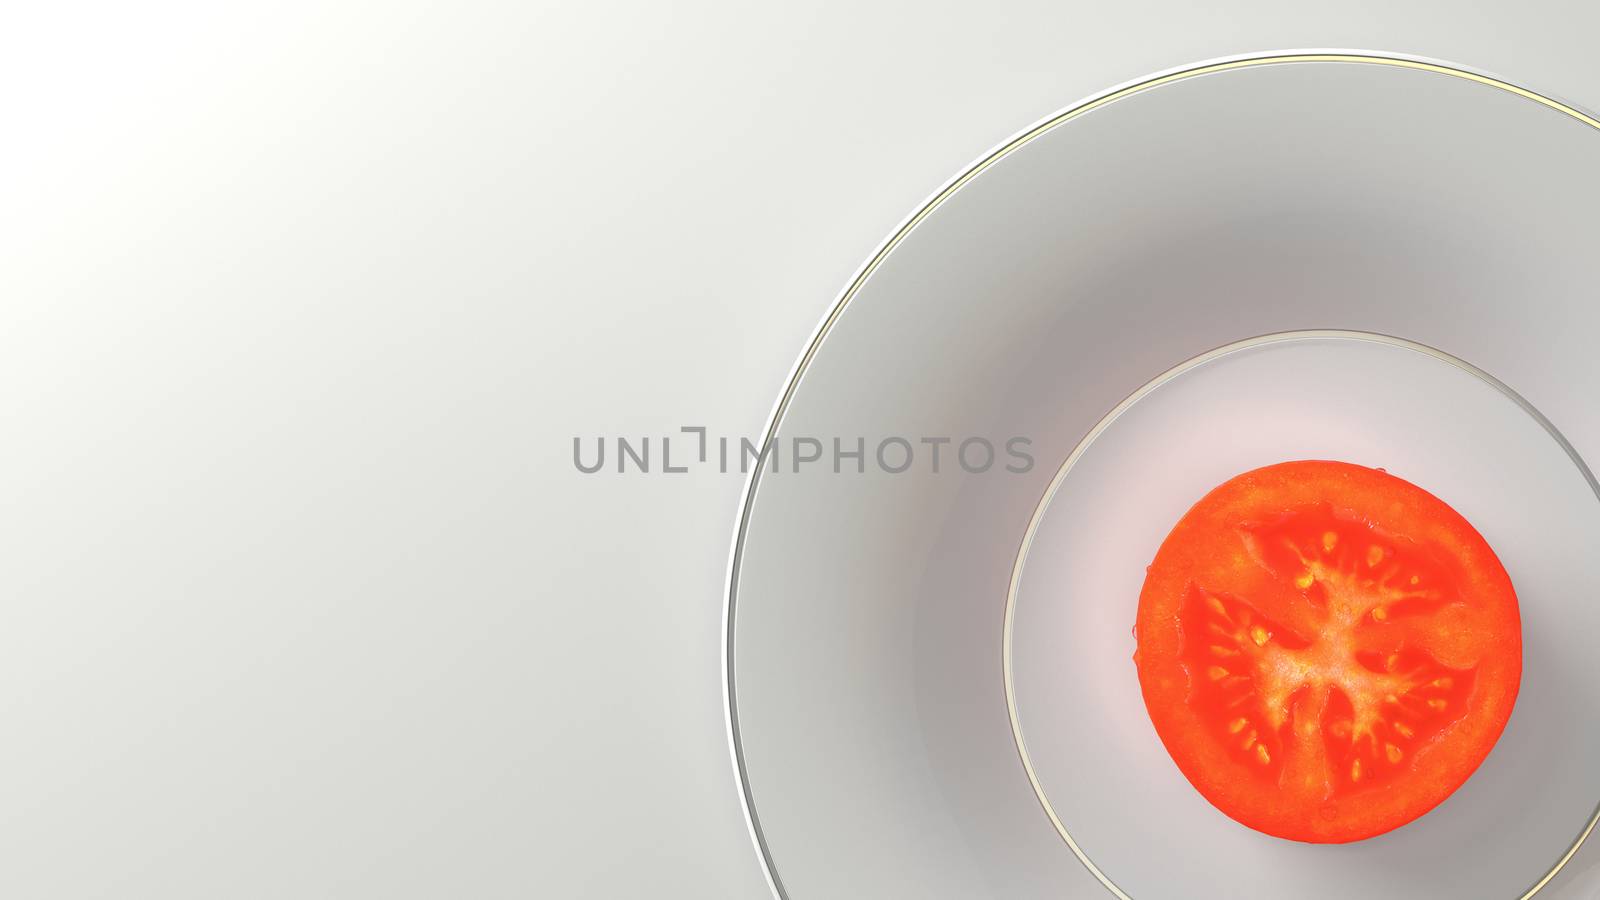 The Golden white plate containing a tomato, cut in half. Represent the service of a dish of tomatoes. Symbolizes the lack of food or the simplicity of a minimalist meal. Can evoke a diet. 3D rendering